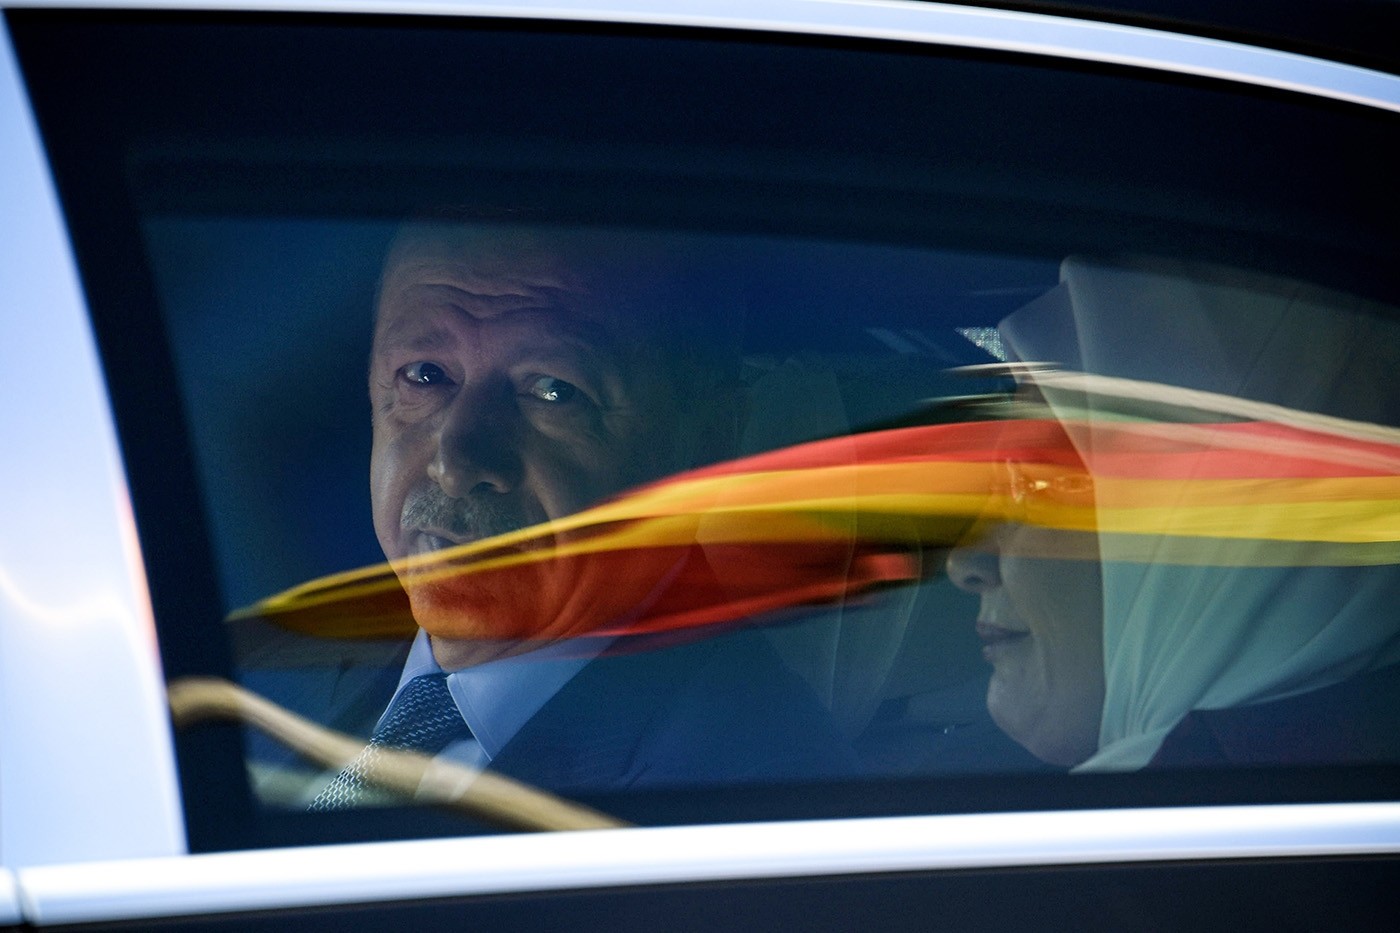 President Recep Tayyip Erdoğan sits in a car behind a reflection of the German flag as he departs after his arrival from the Berlin Tegel Airport for an official visit in Berlin, Germany, 27 September 2018. (EPA Photo) 